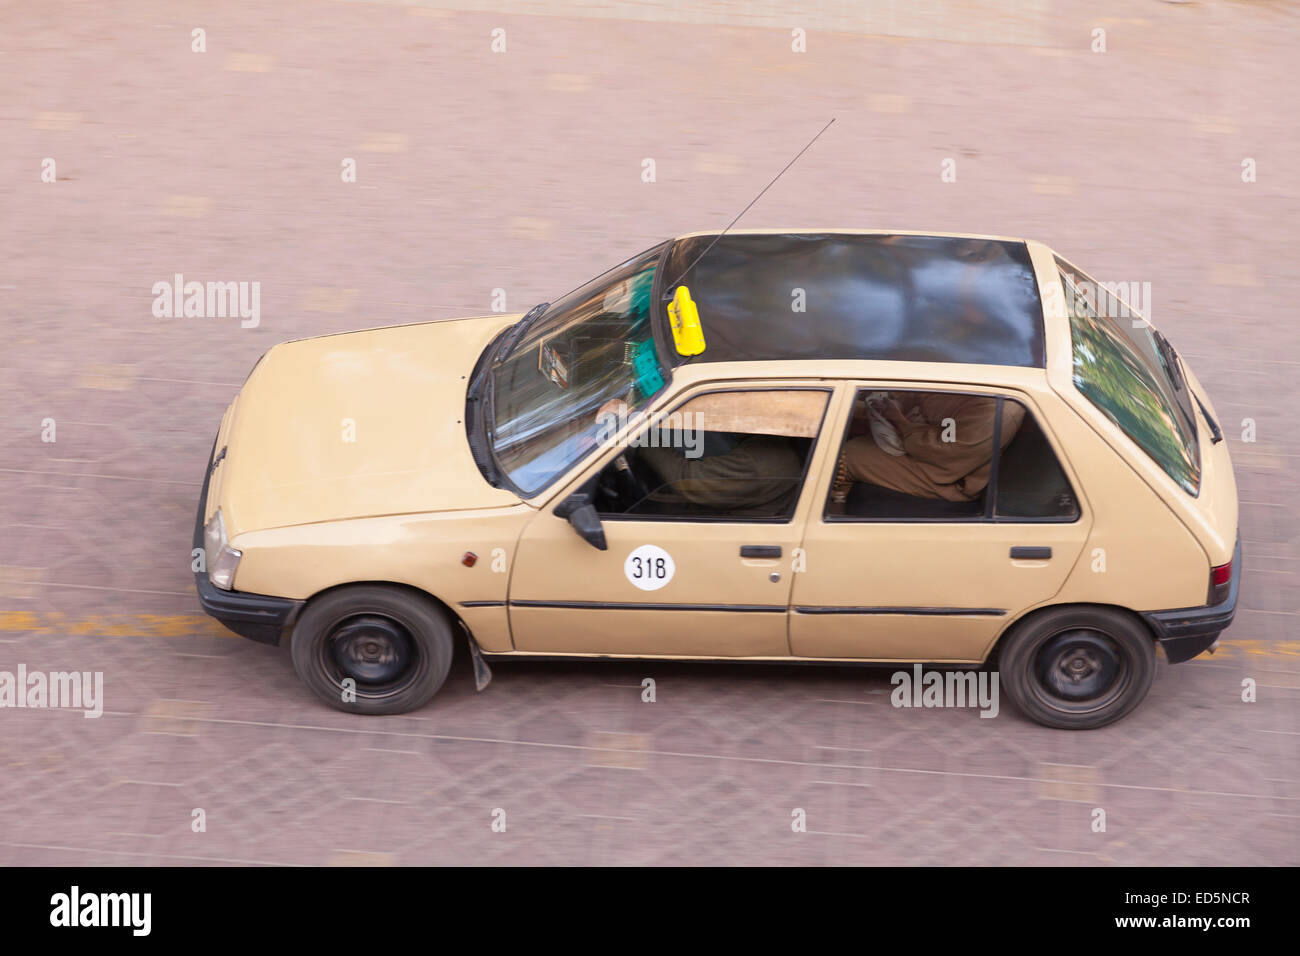 Petit taxi. Street. Marrakech, Morocco. North Africa, Africa Stock Photo